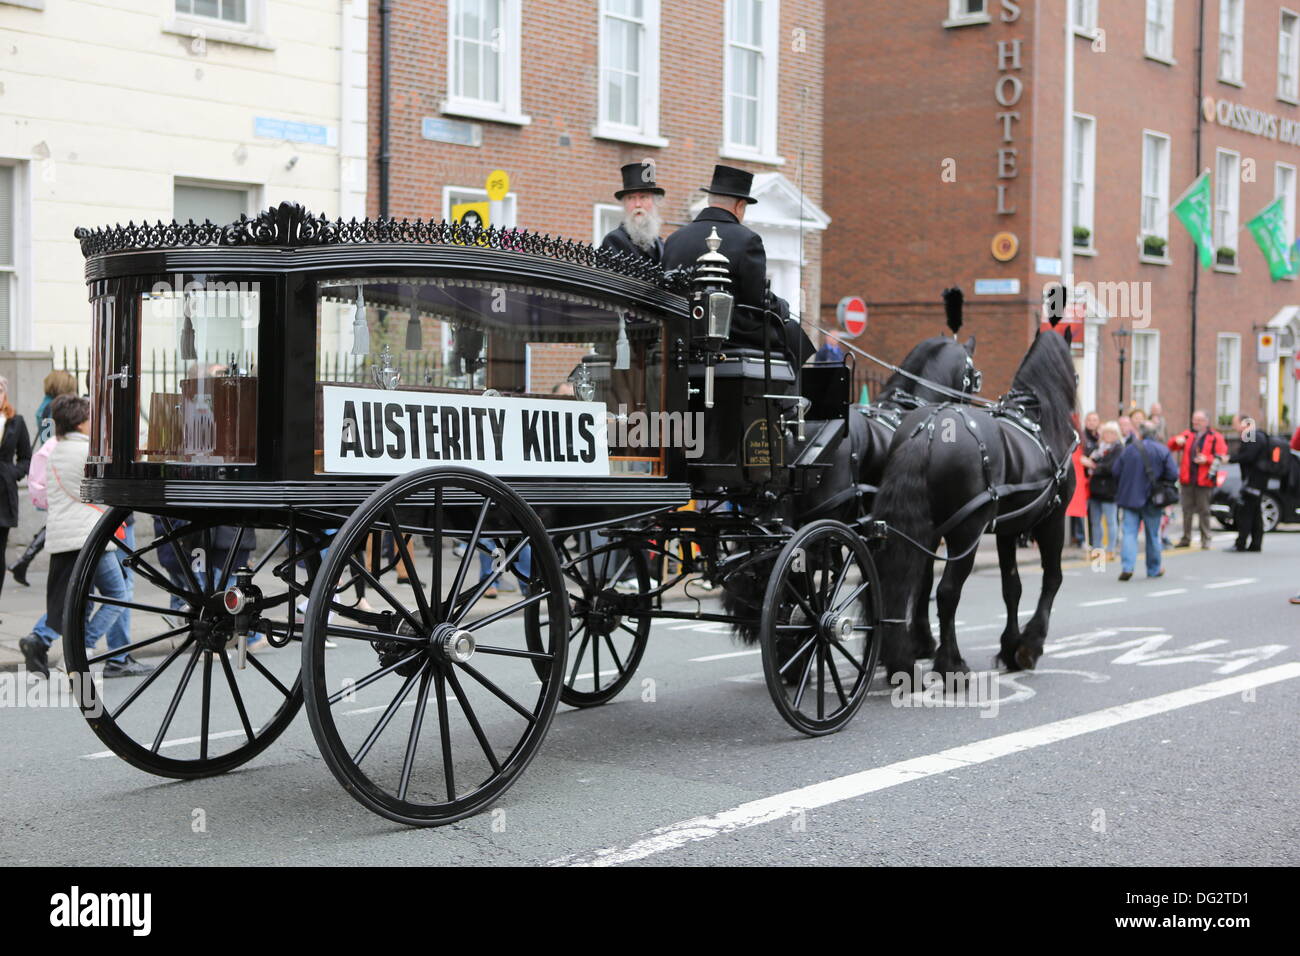 Dublin, Ireland. 12th October 2013. A horse drawn hearse leads the protest march, signifying the death through austerity measures. Unions called for a protest march through Dublin, ahead of the announcing of the 2014 budget next week. They protested against cuts in Social Welfare, Health and Education and for an utilisation of alternative revenue sources by the government. © Michael Debets/Alamy Live News Stock Photo